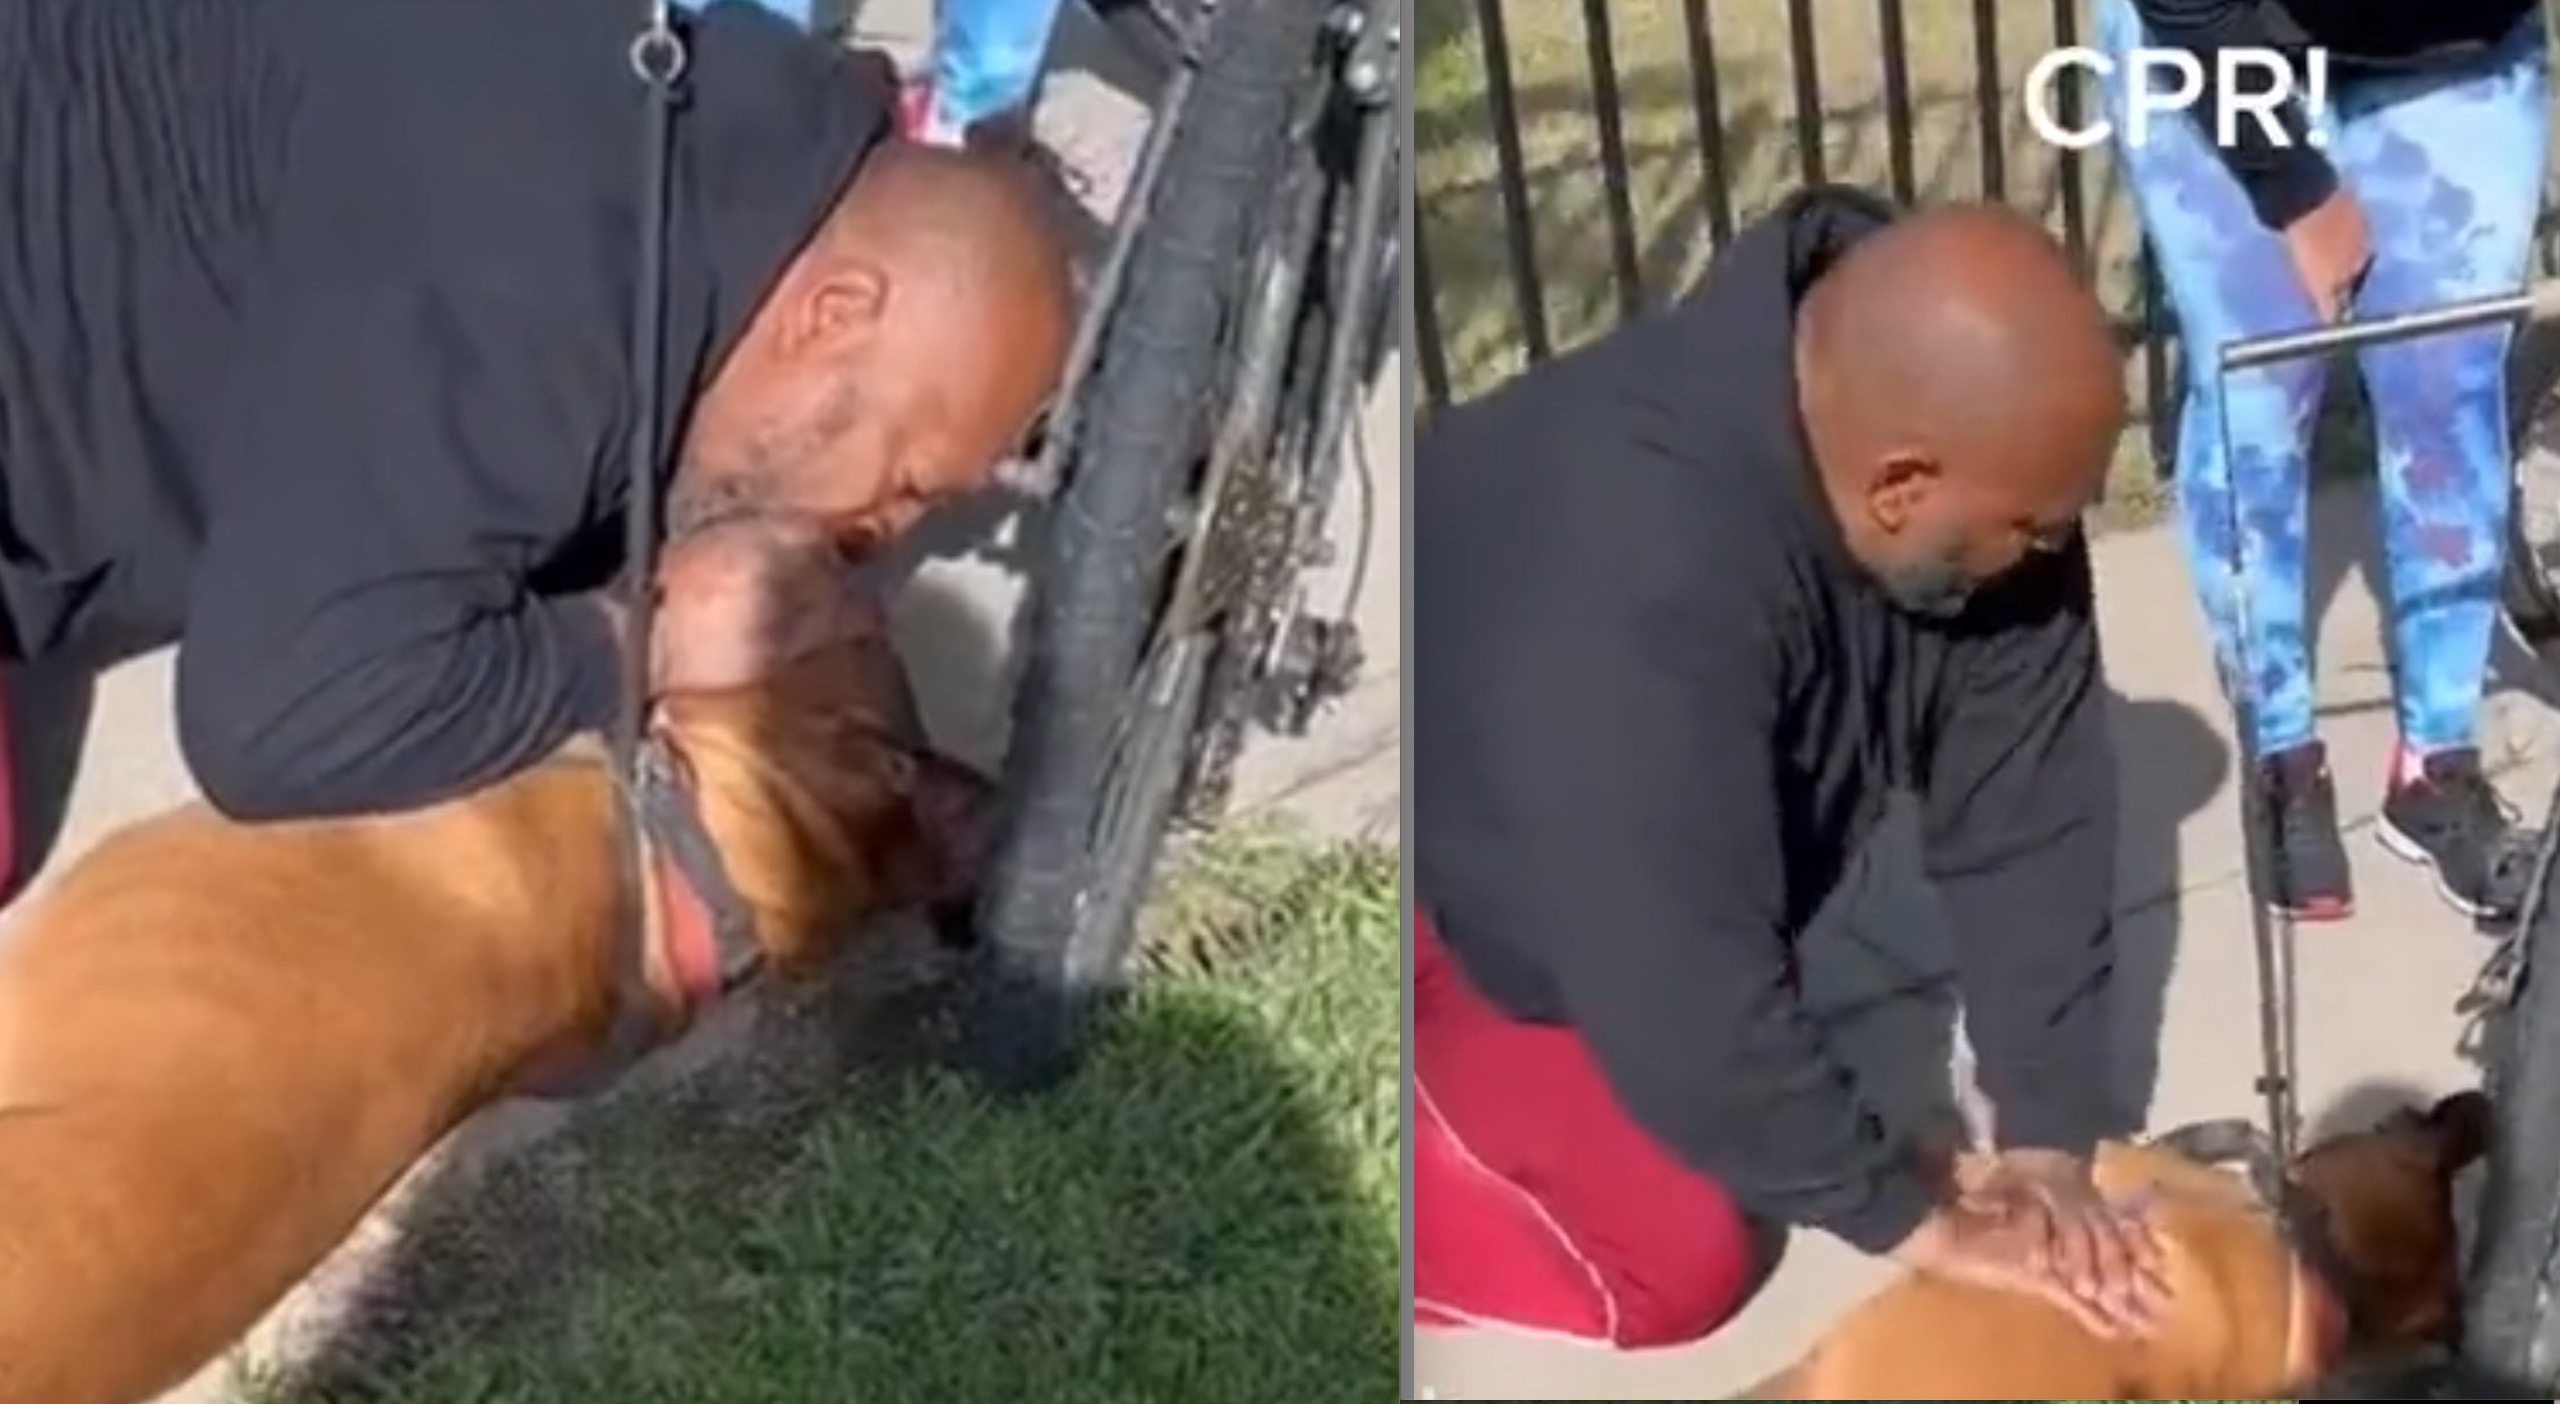 Man Performs CPR on Unresponsive Dog to Save Its Life - Watch Video